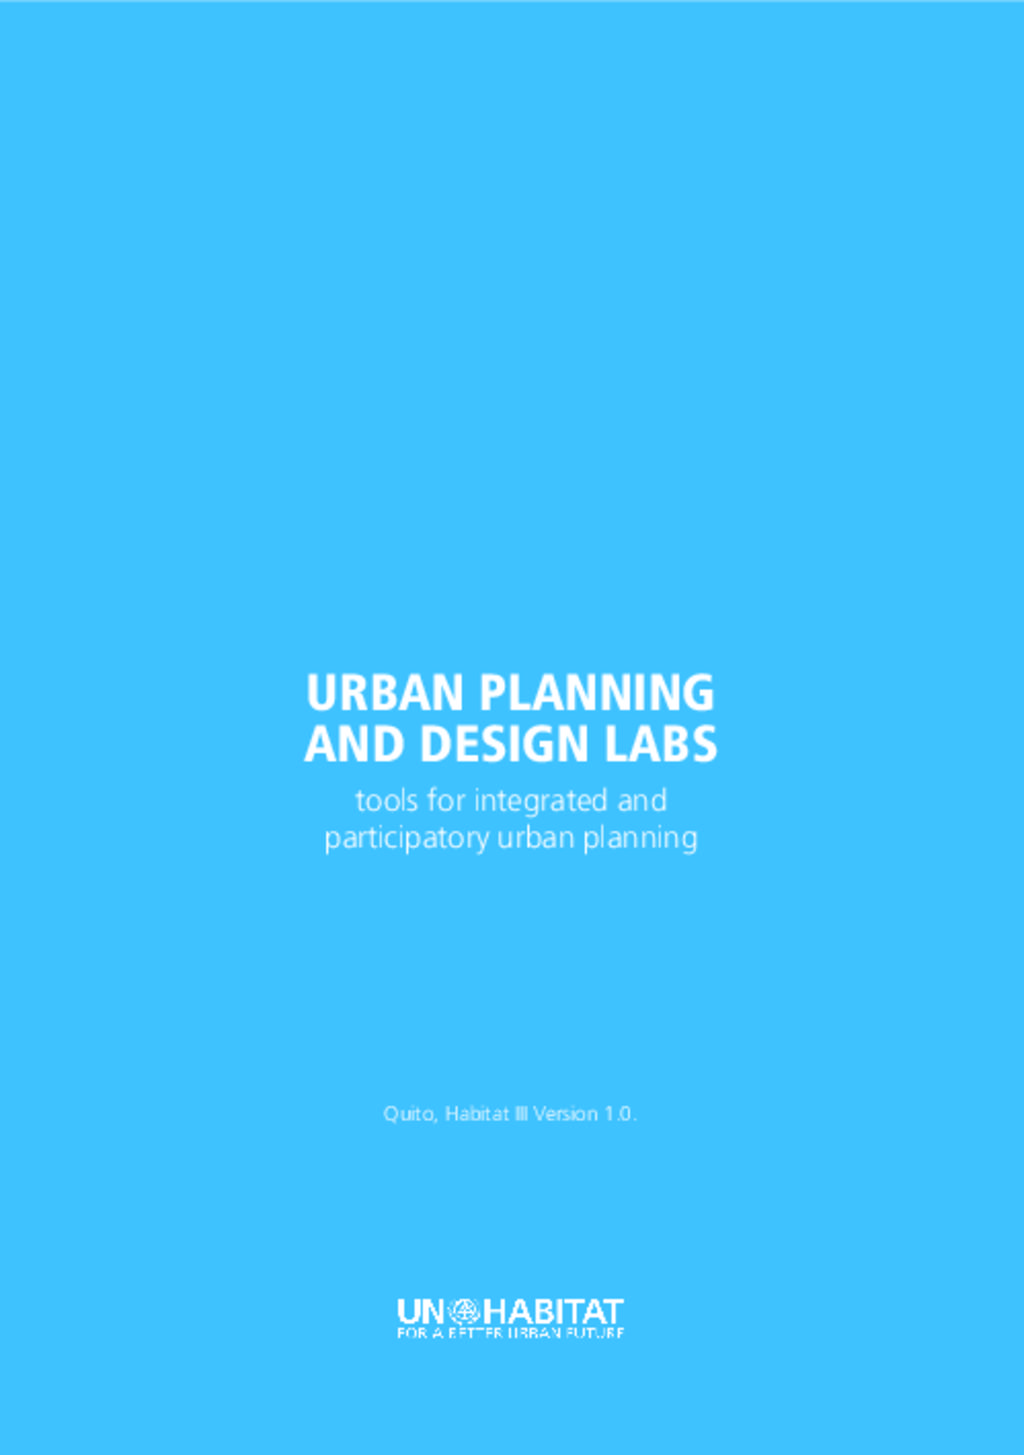 Tools for Integrated and Participatory Planning